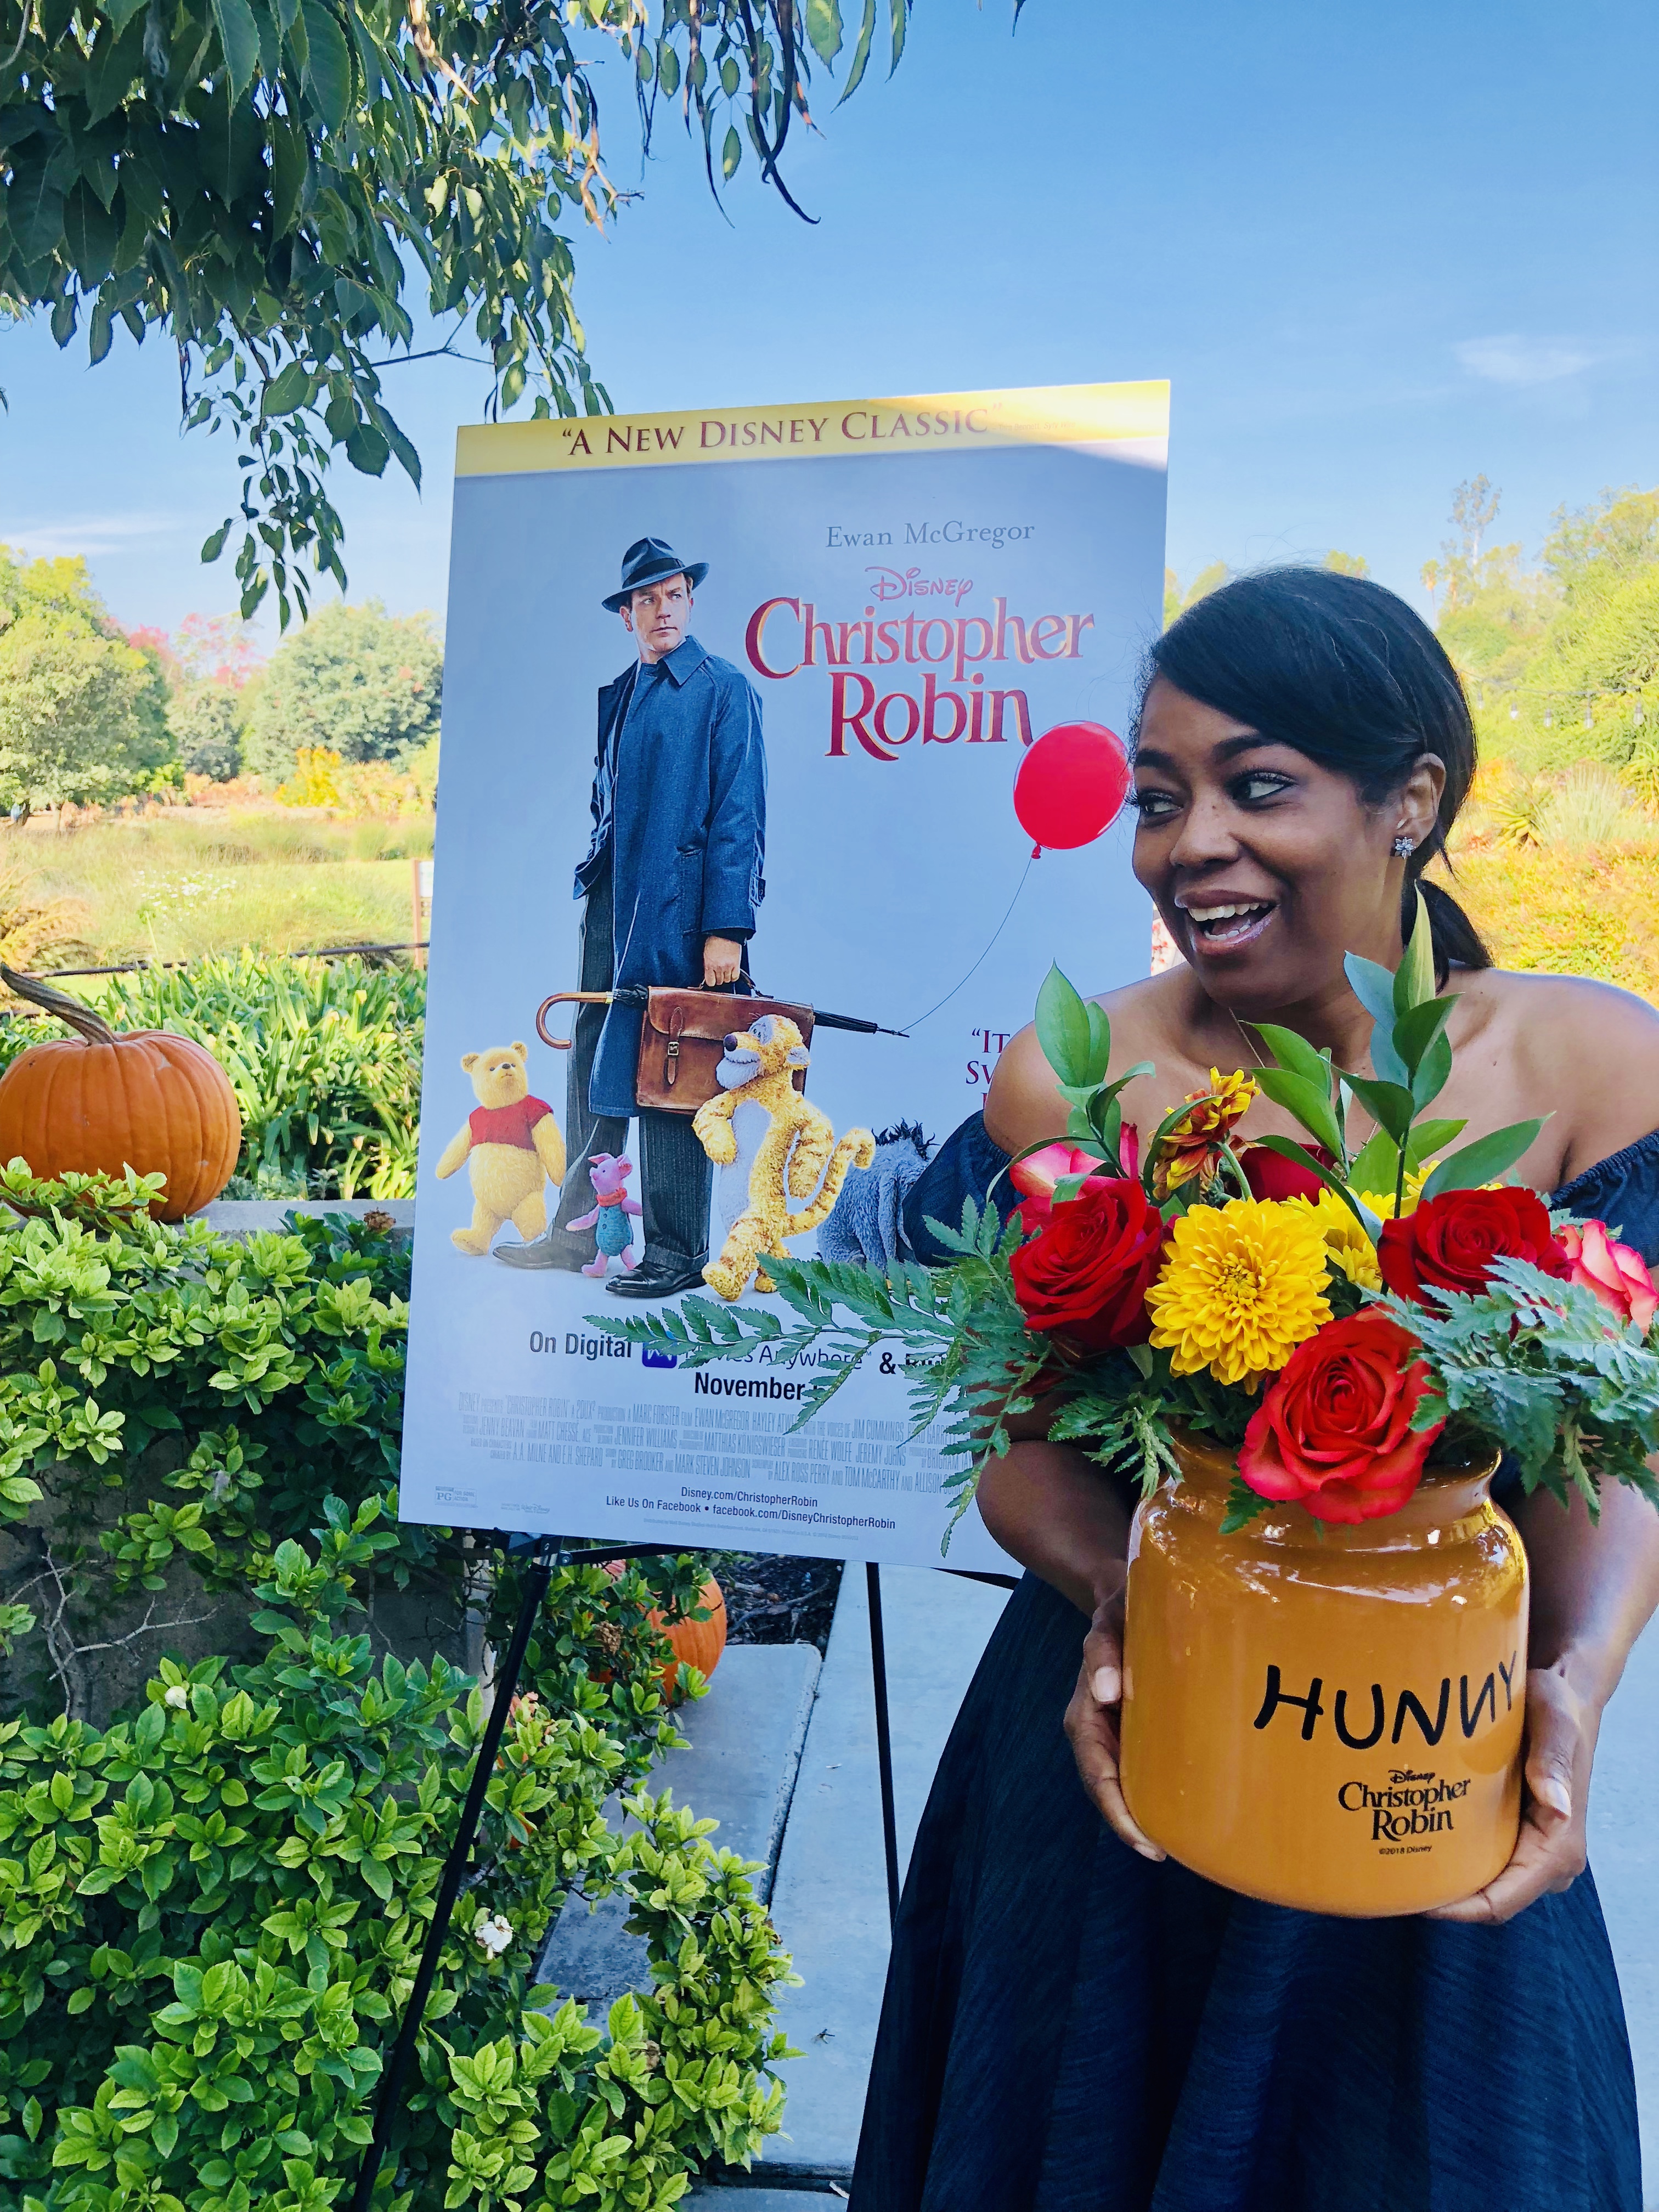 A Floral Arrangement Class & Friendsgiving Luncheon To Celebrate The Digital Release Of Christopher Robin